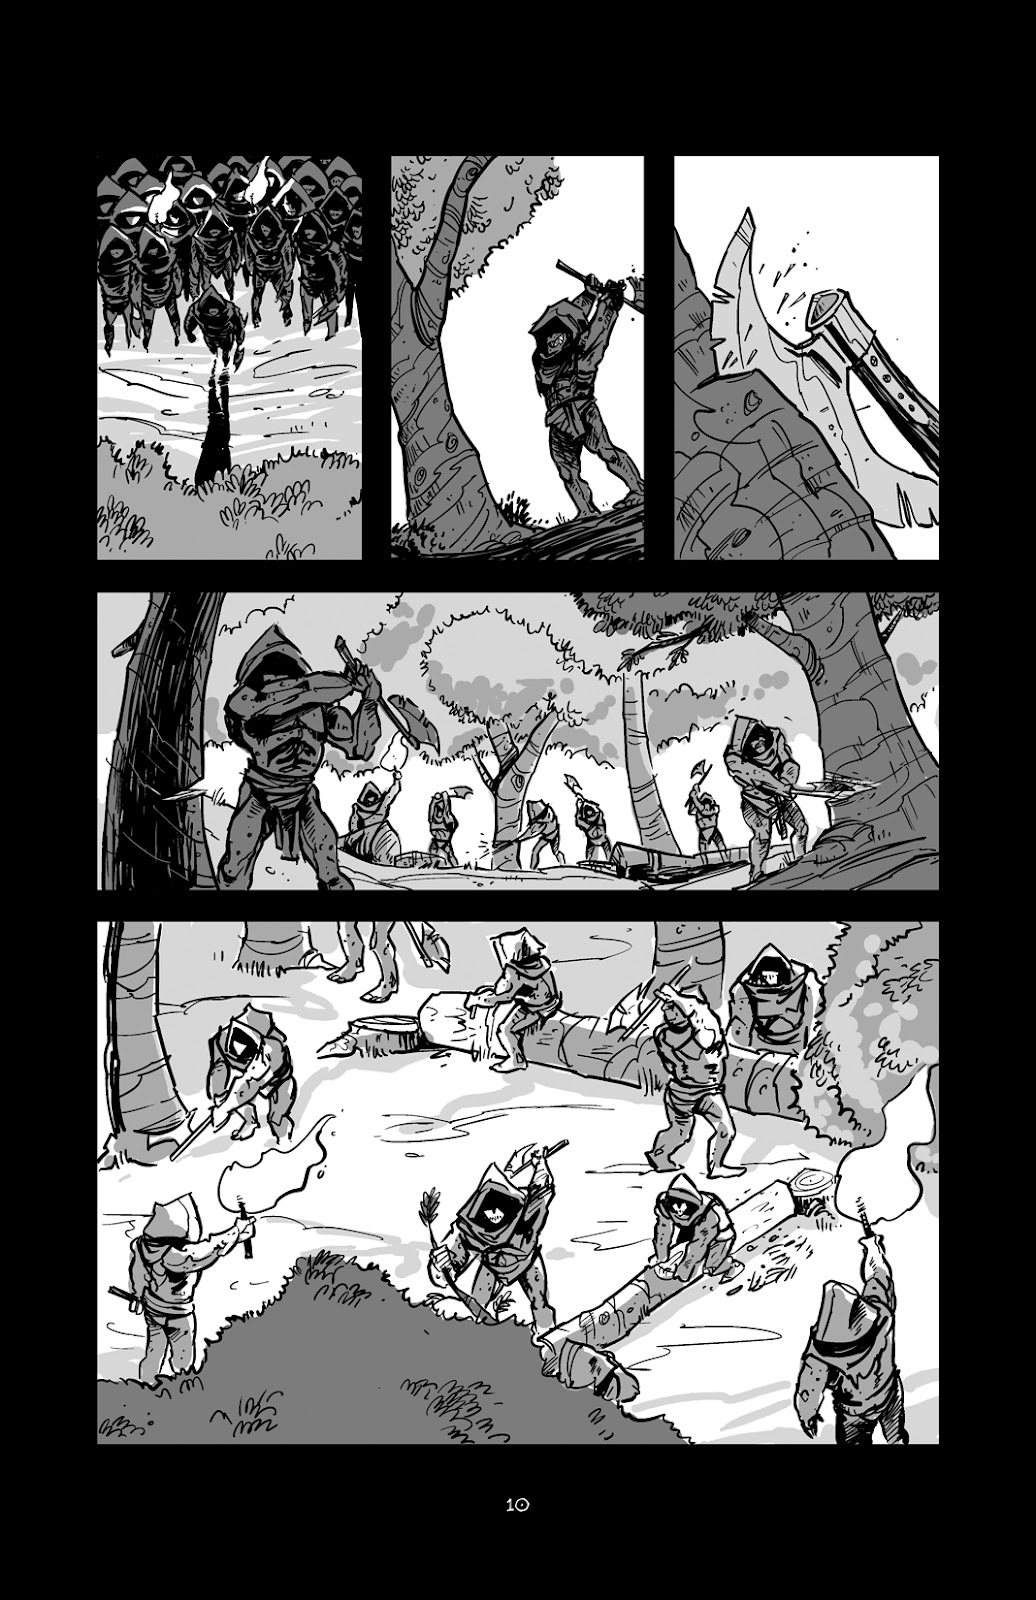 Pinocchio: Vampire Slayer - Of Wood and Blood issue 1 - Page 11